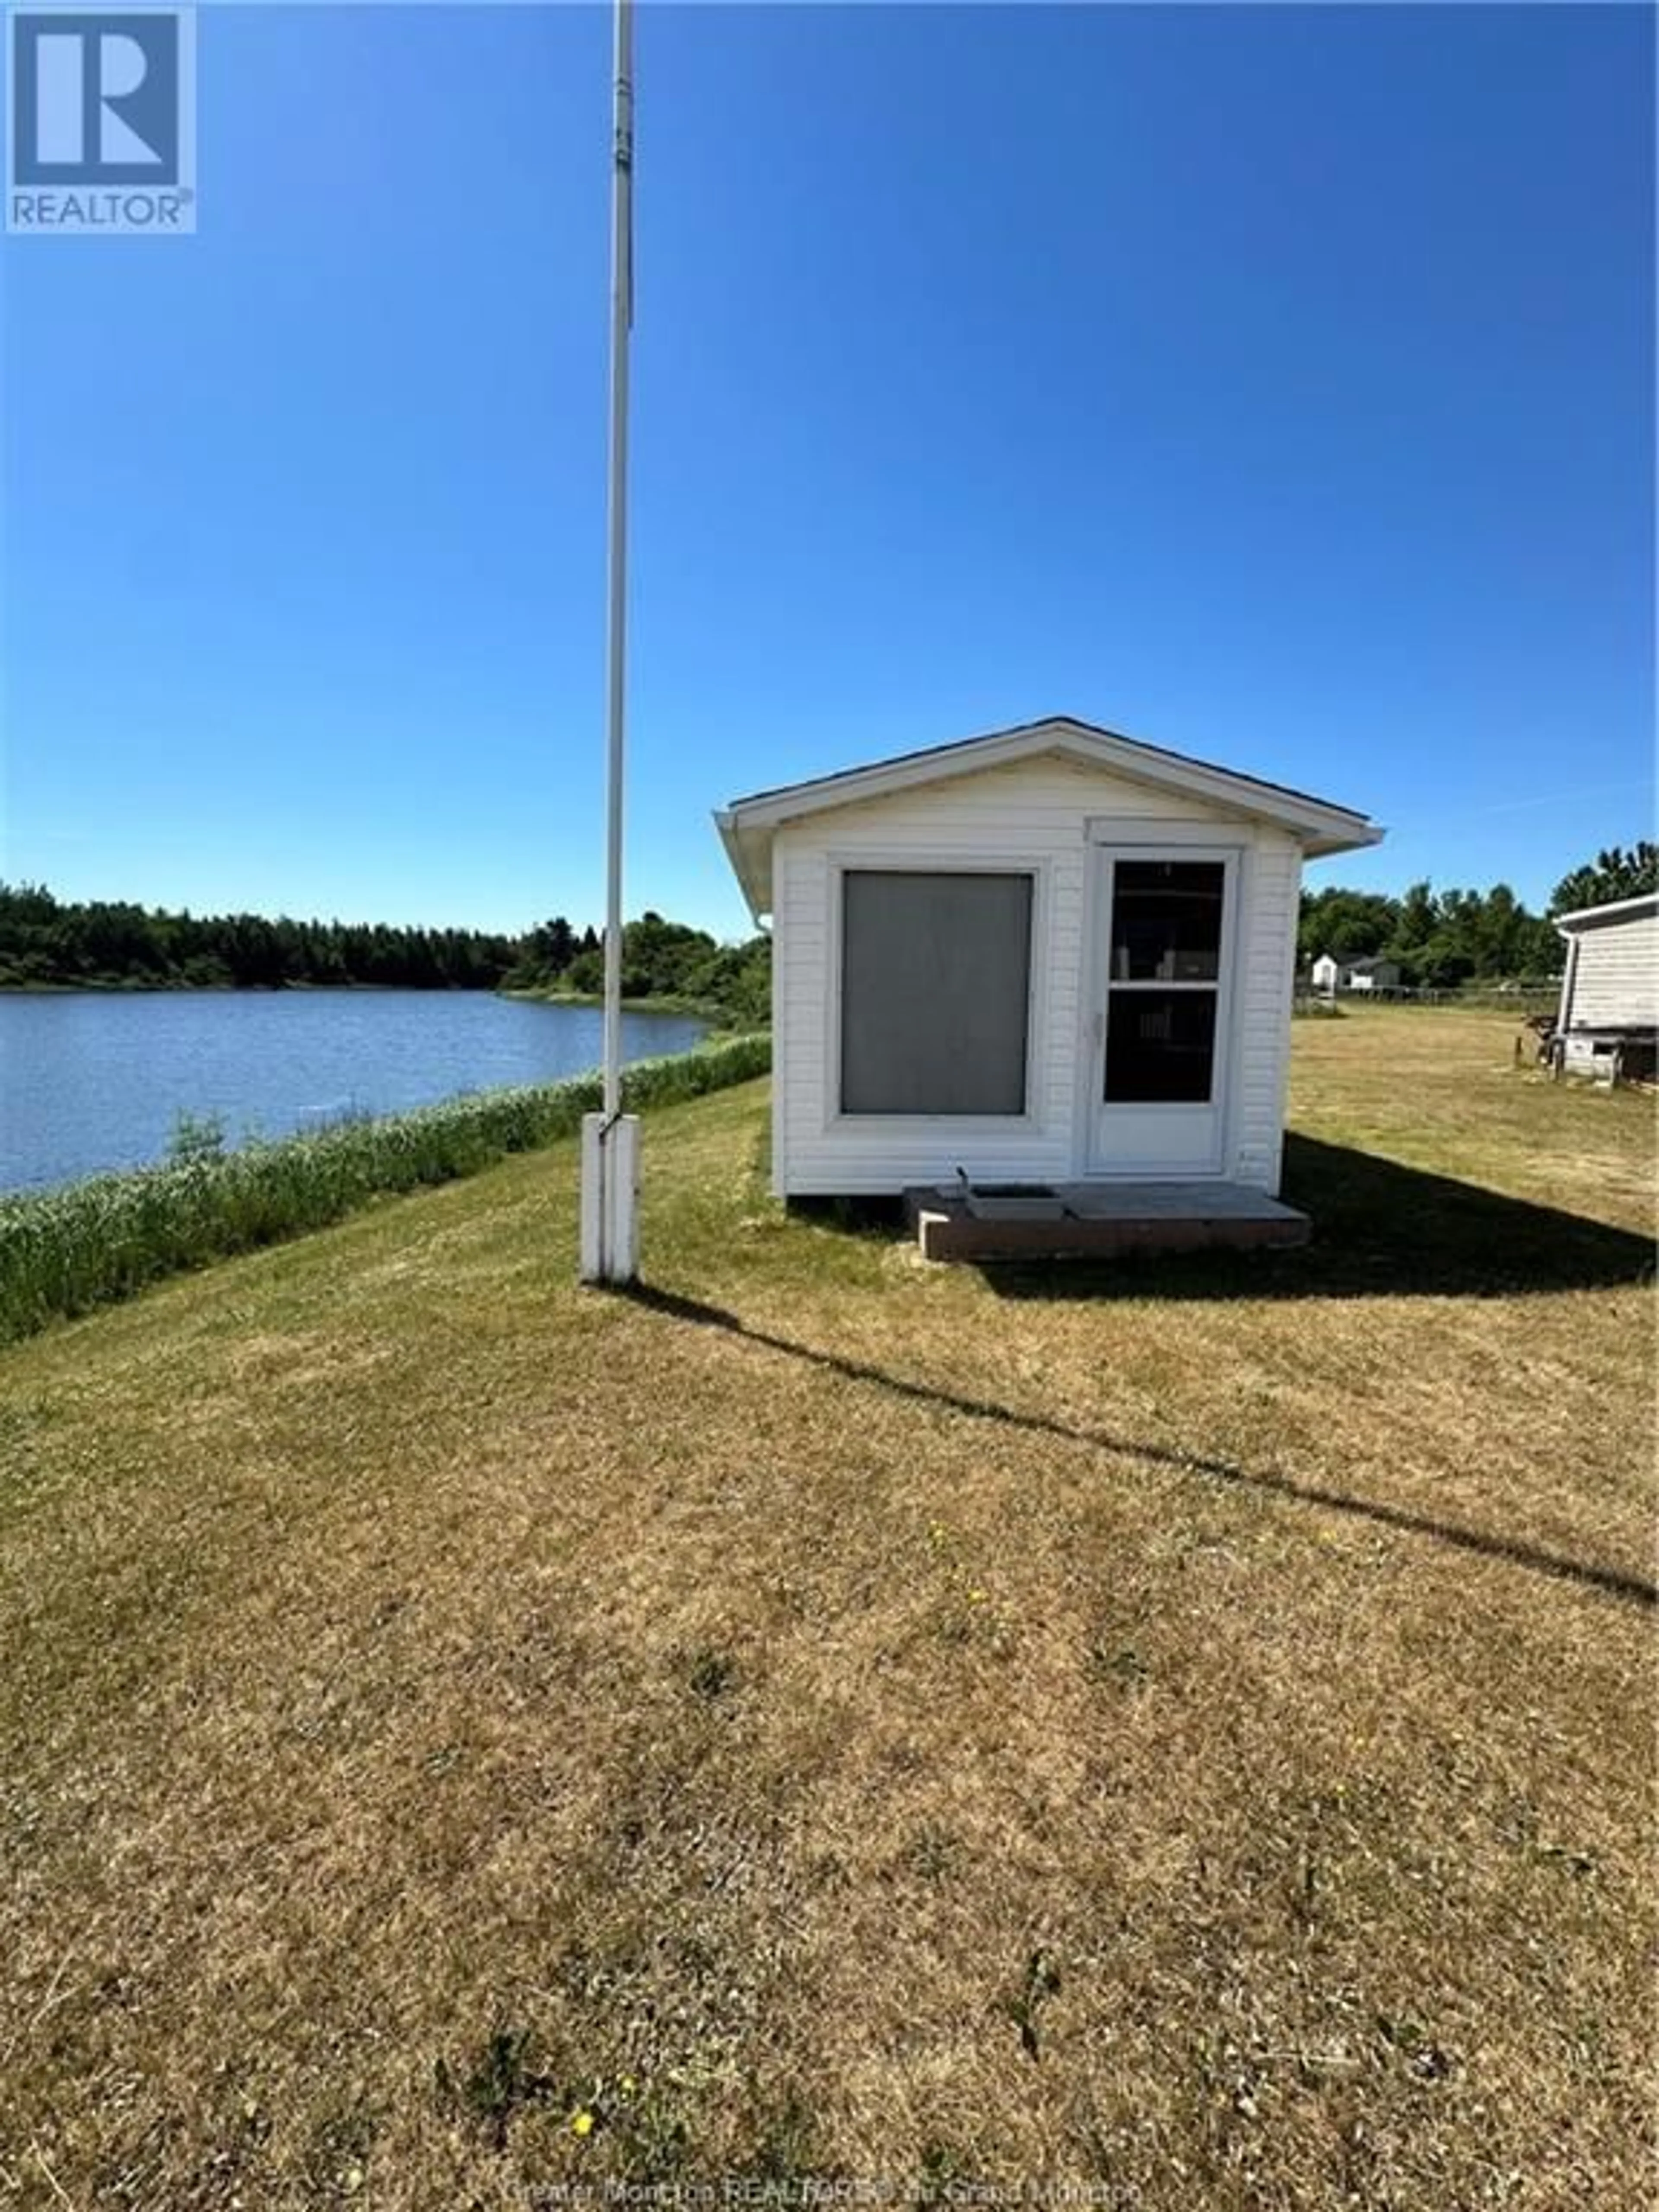 Shed for 3723 Route 505, Richibucto Village New Brunswick E4W1N2